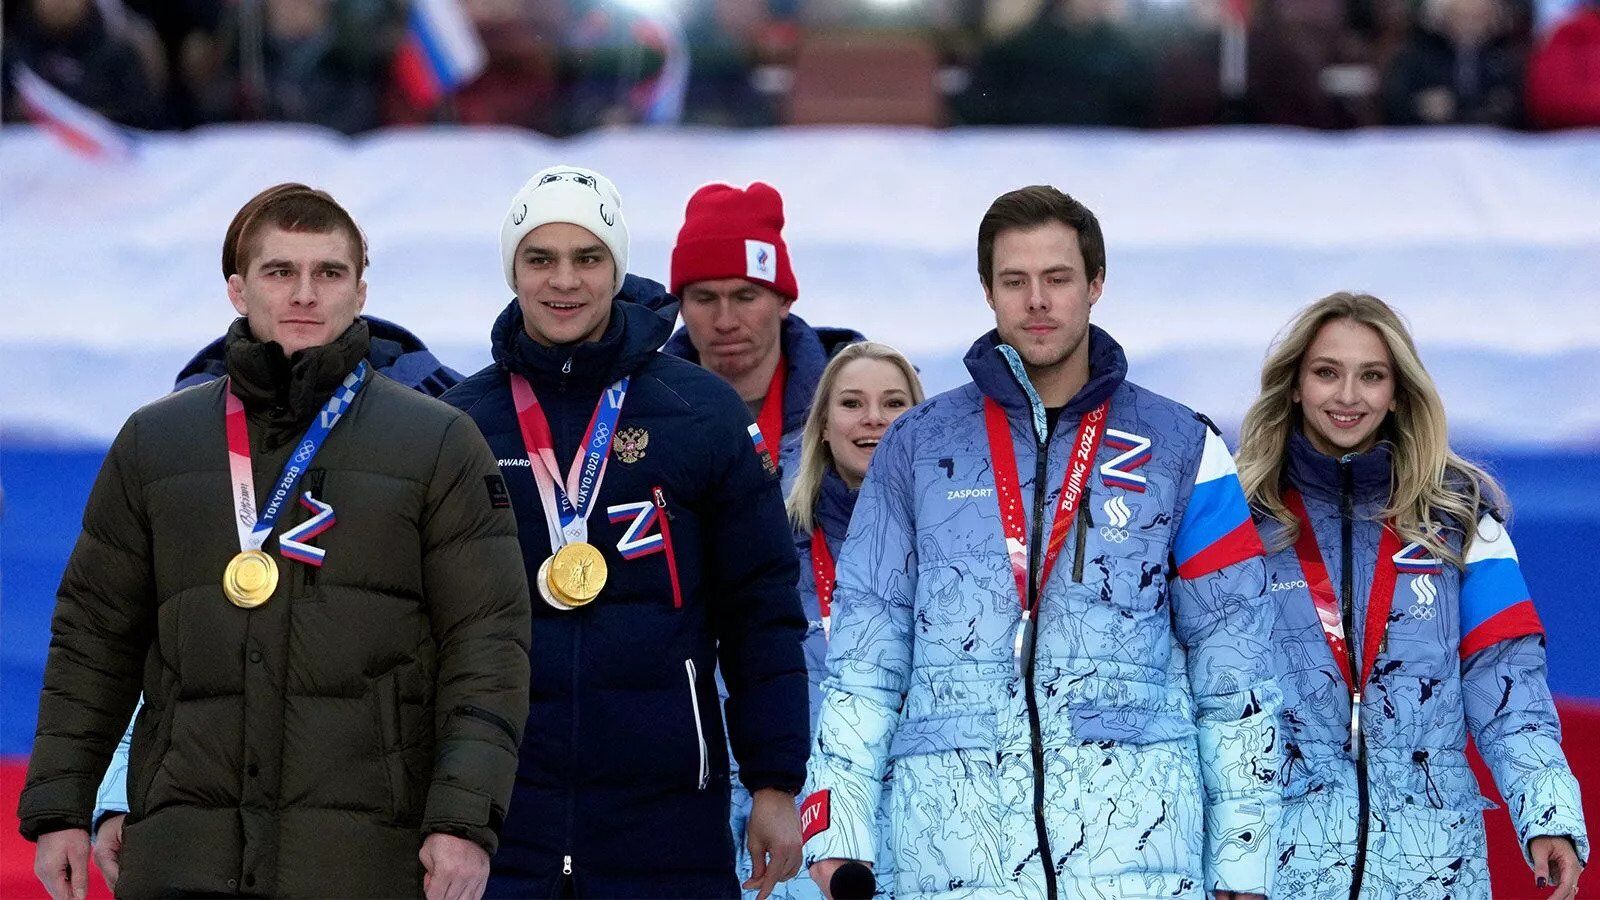 ''It will all be over soon'': Russian Olympic champion dreams of Ukrainians kneeling before Russians